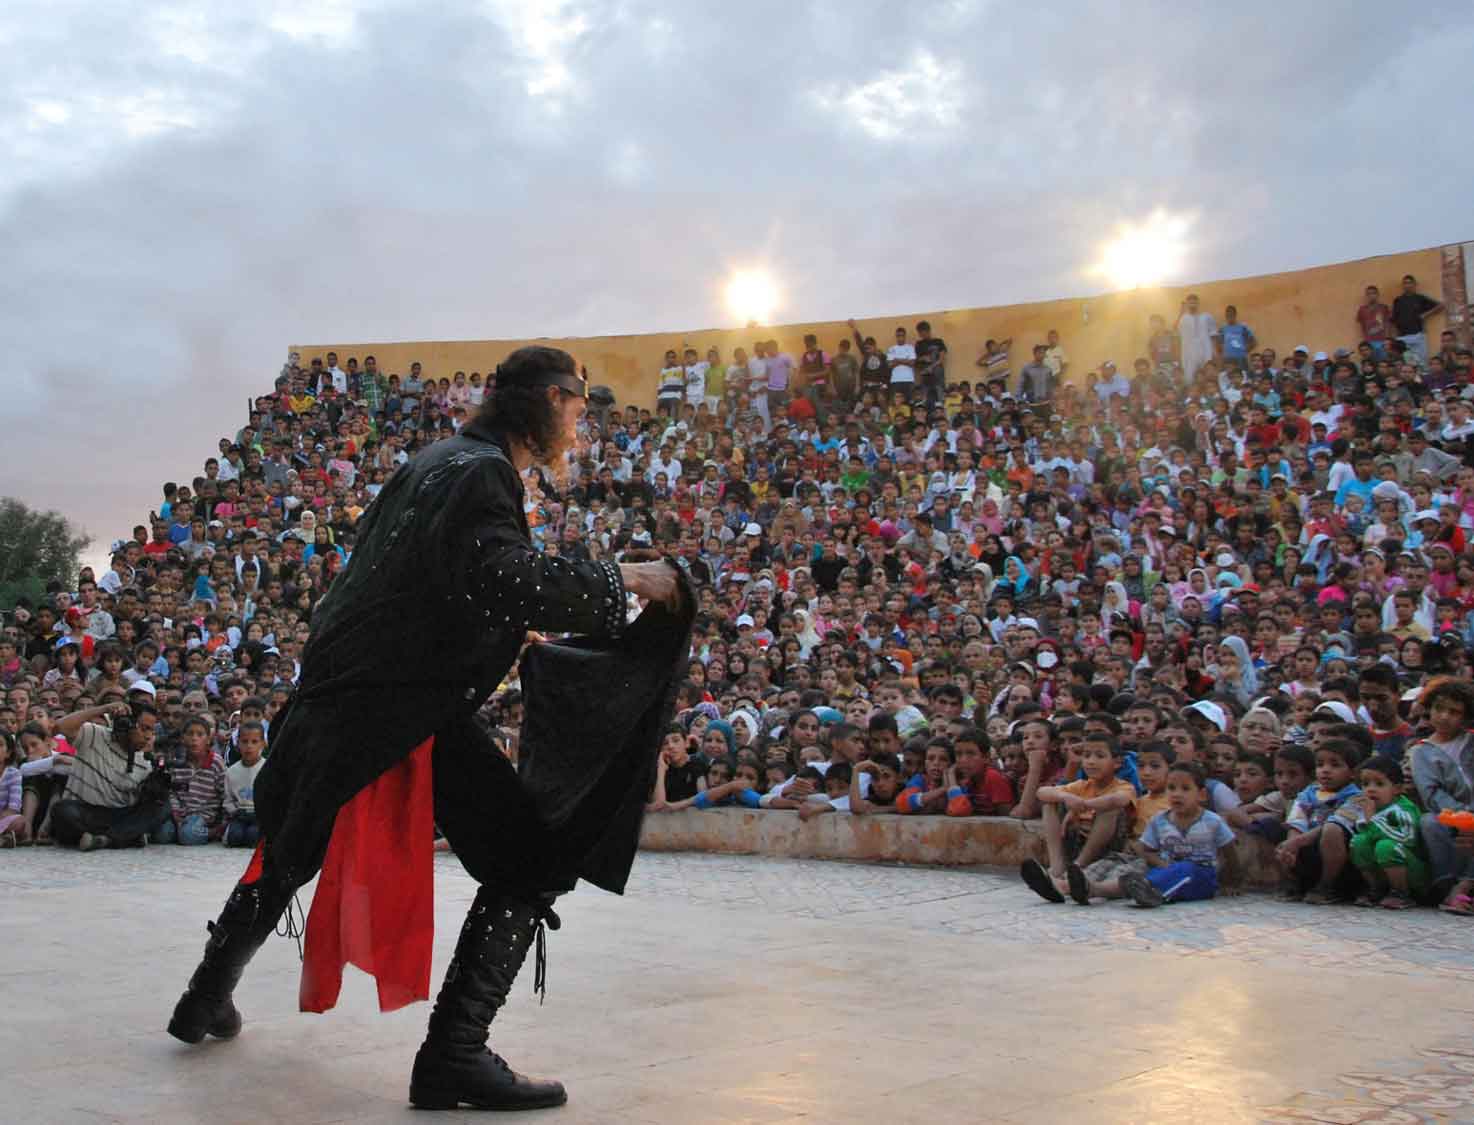 Loran magician doing a magic show in Algeria for 5000 peoples